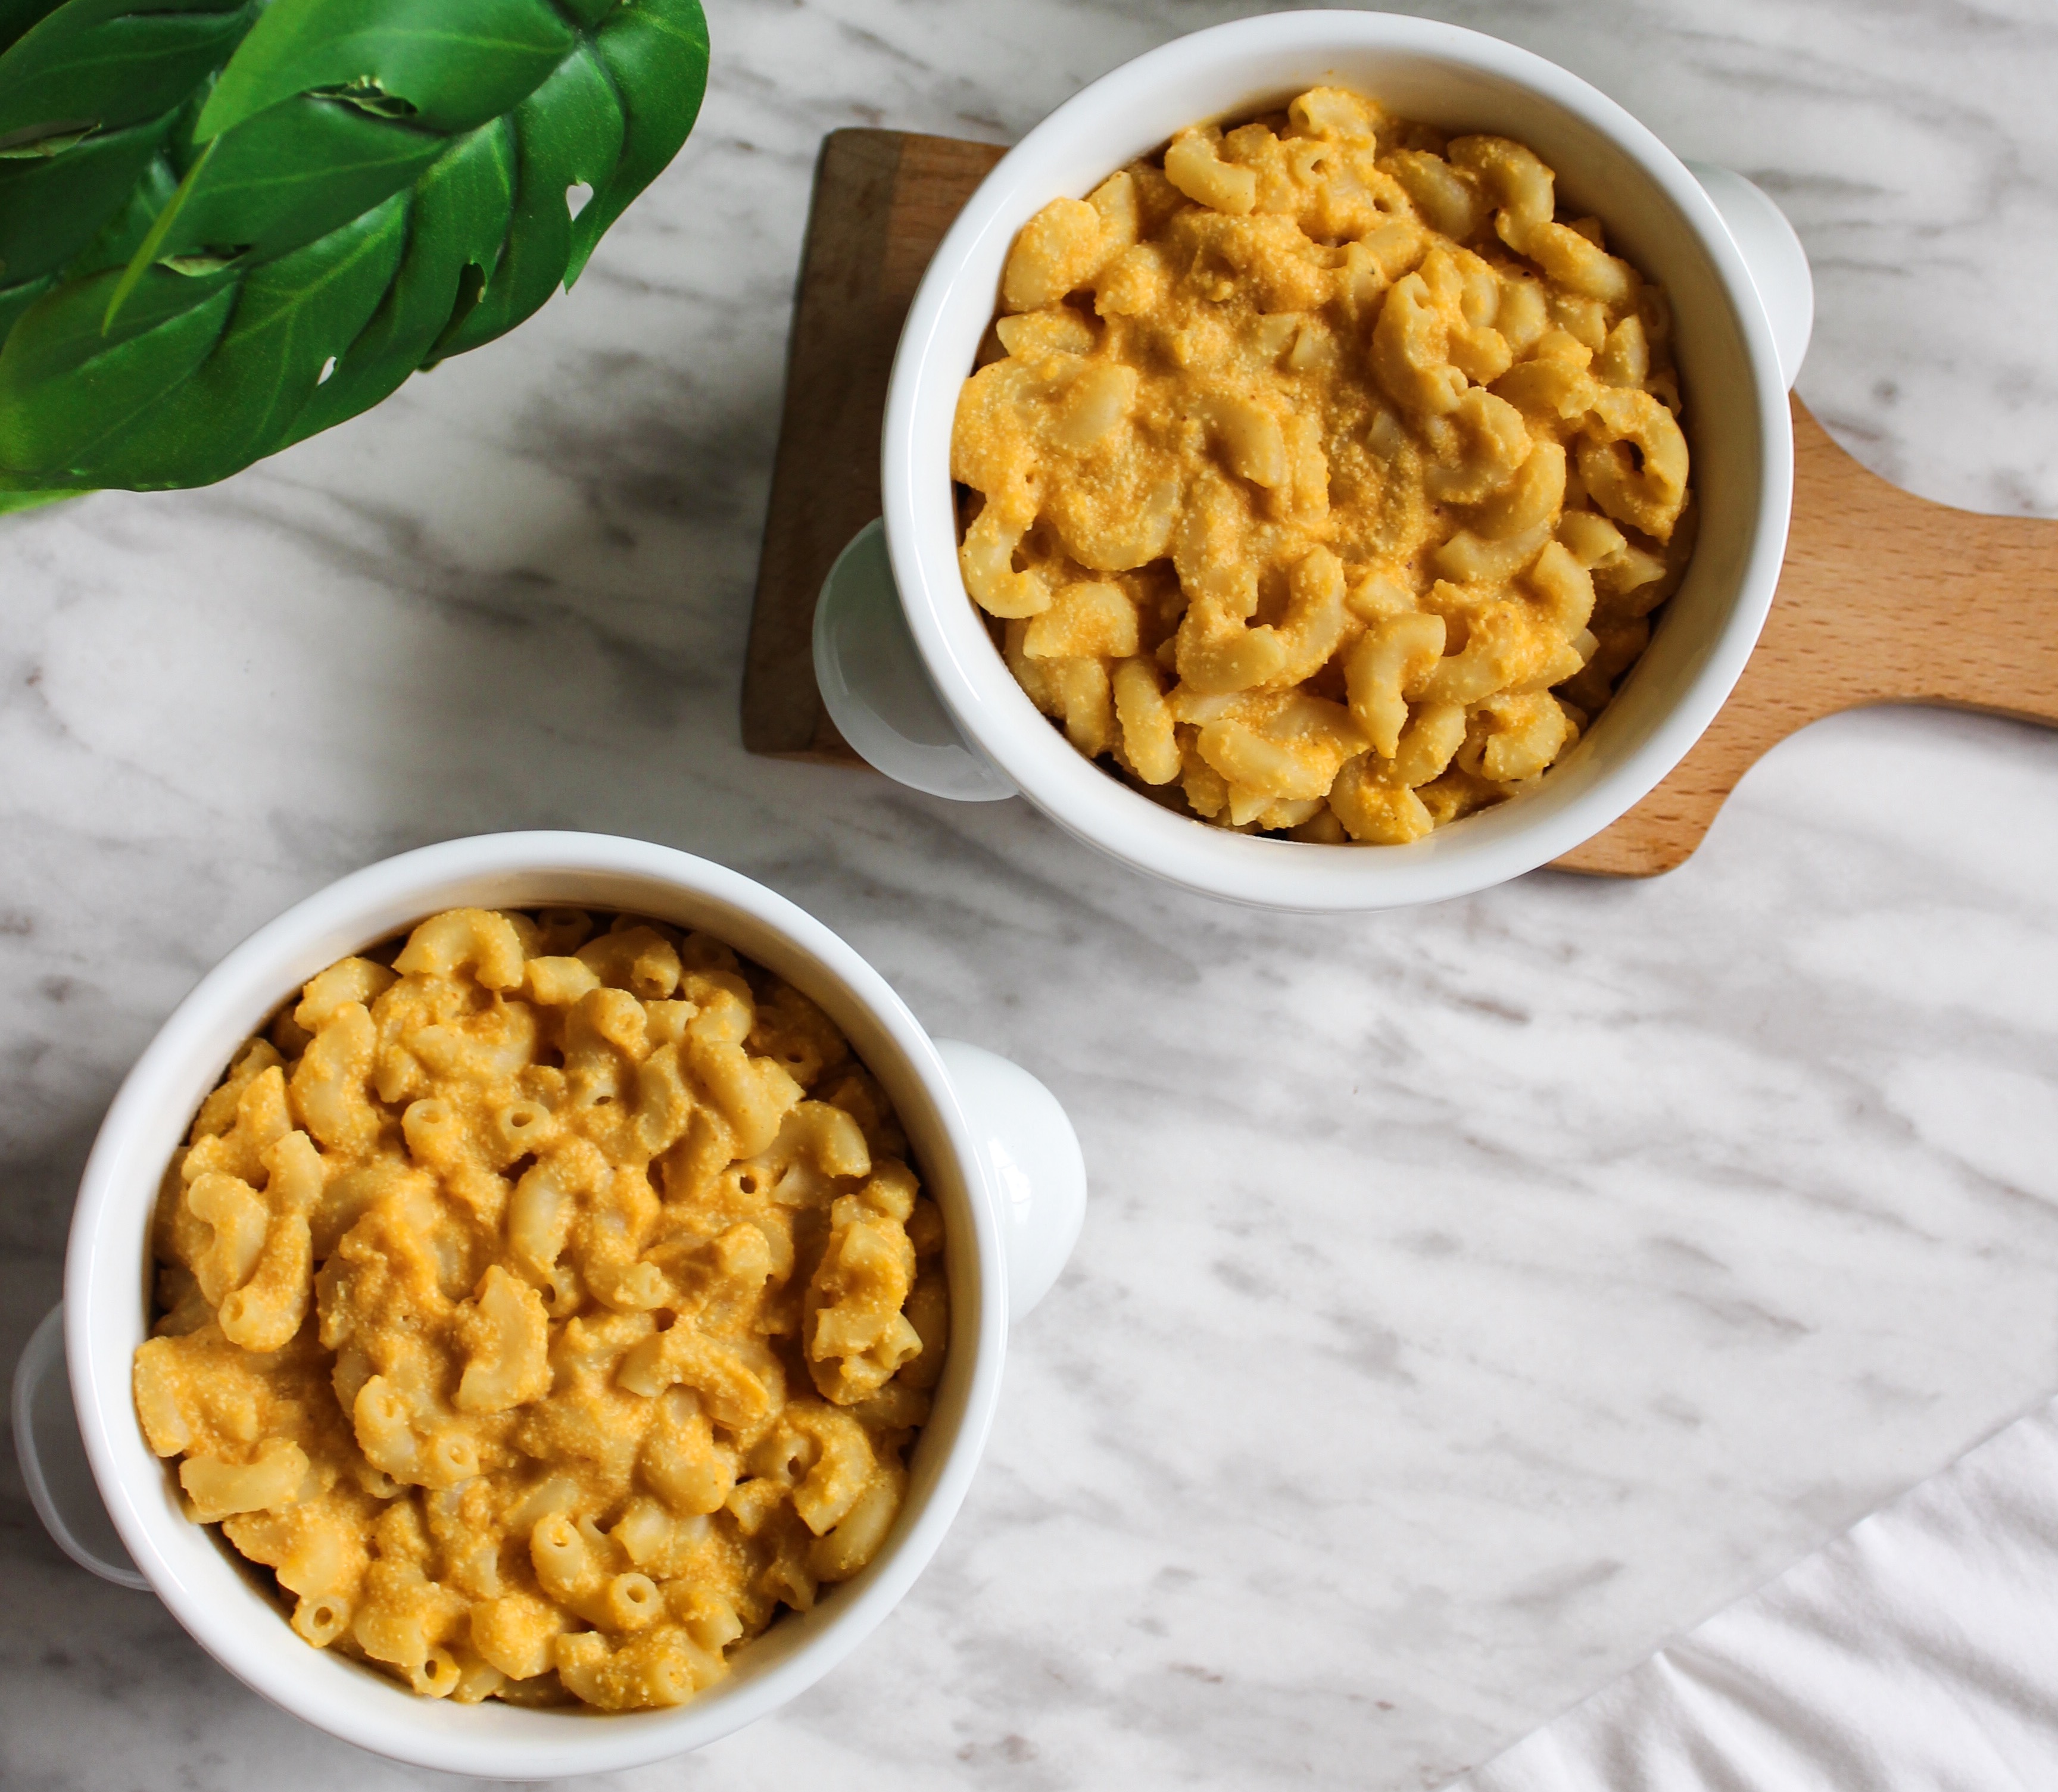 Vegan mac and cheese recipe from Wholesome Culture Cookbook